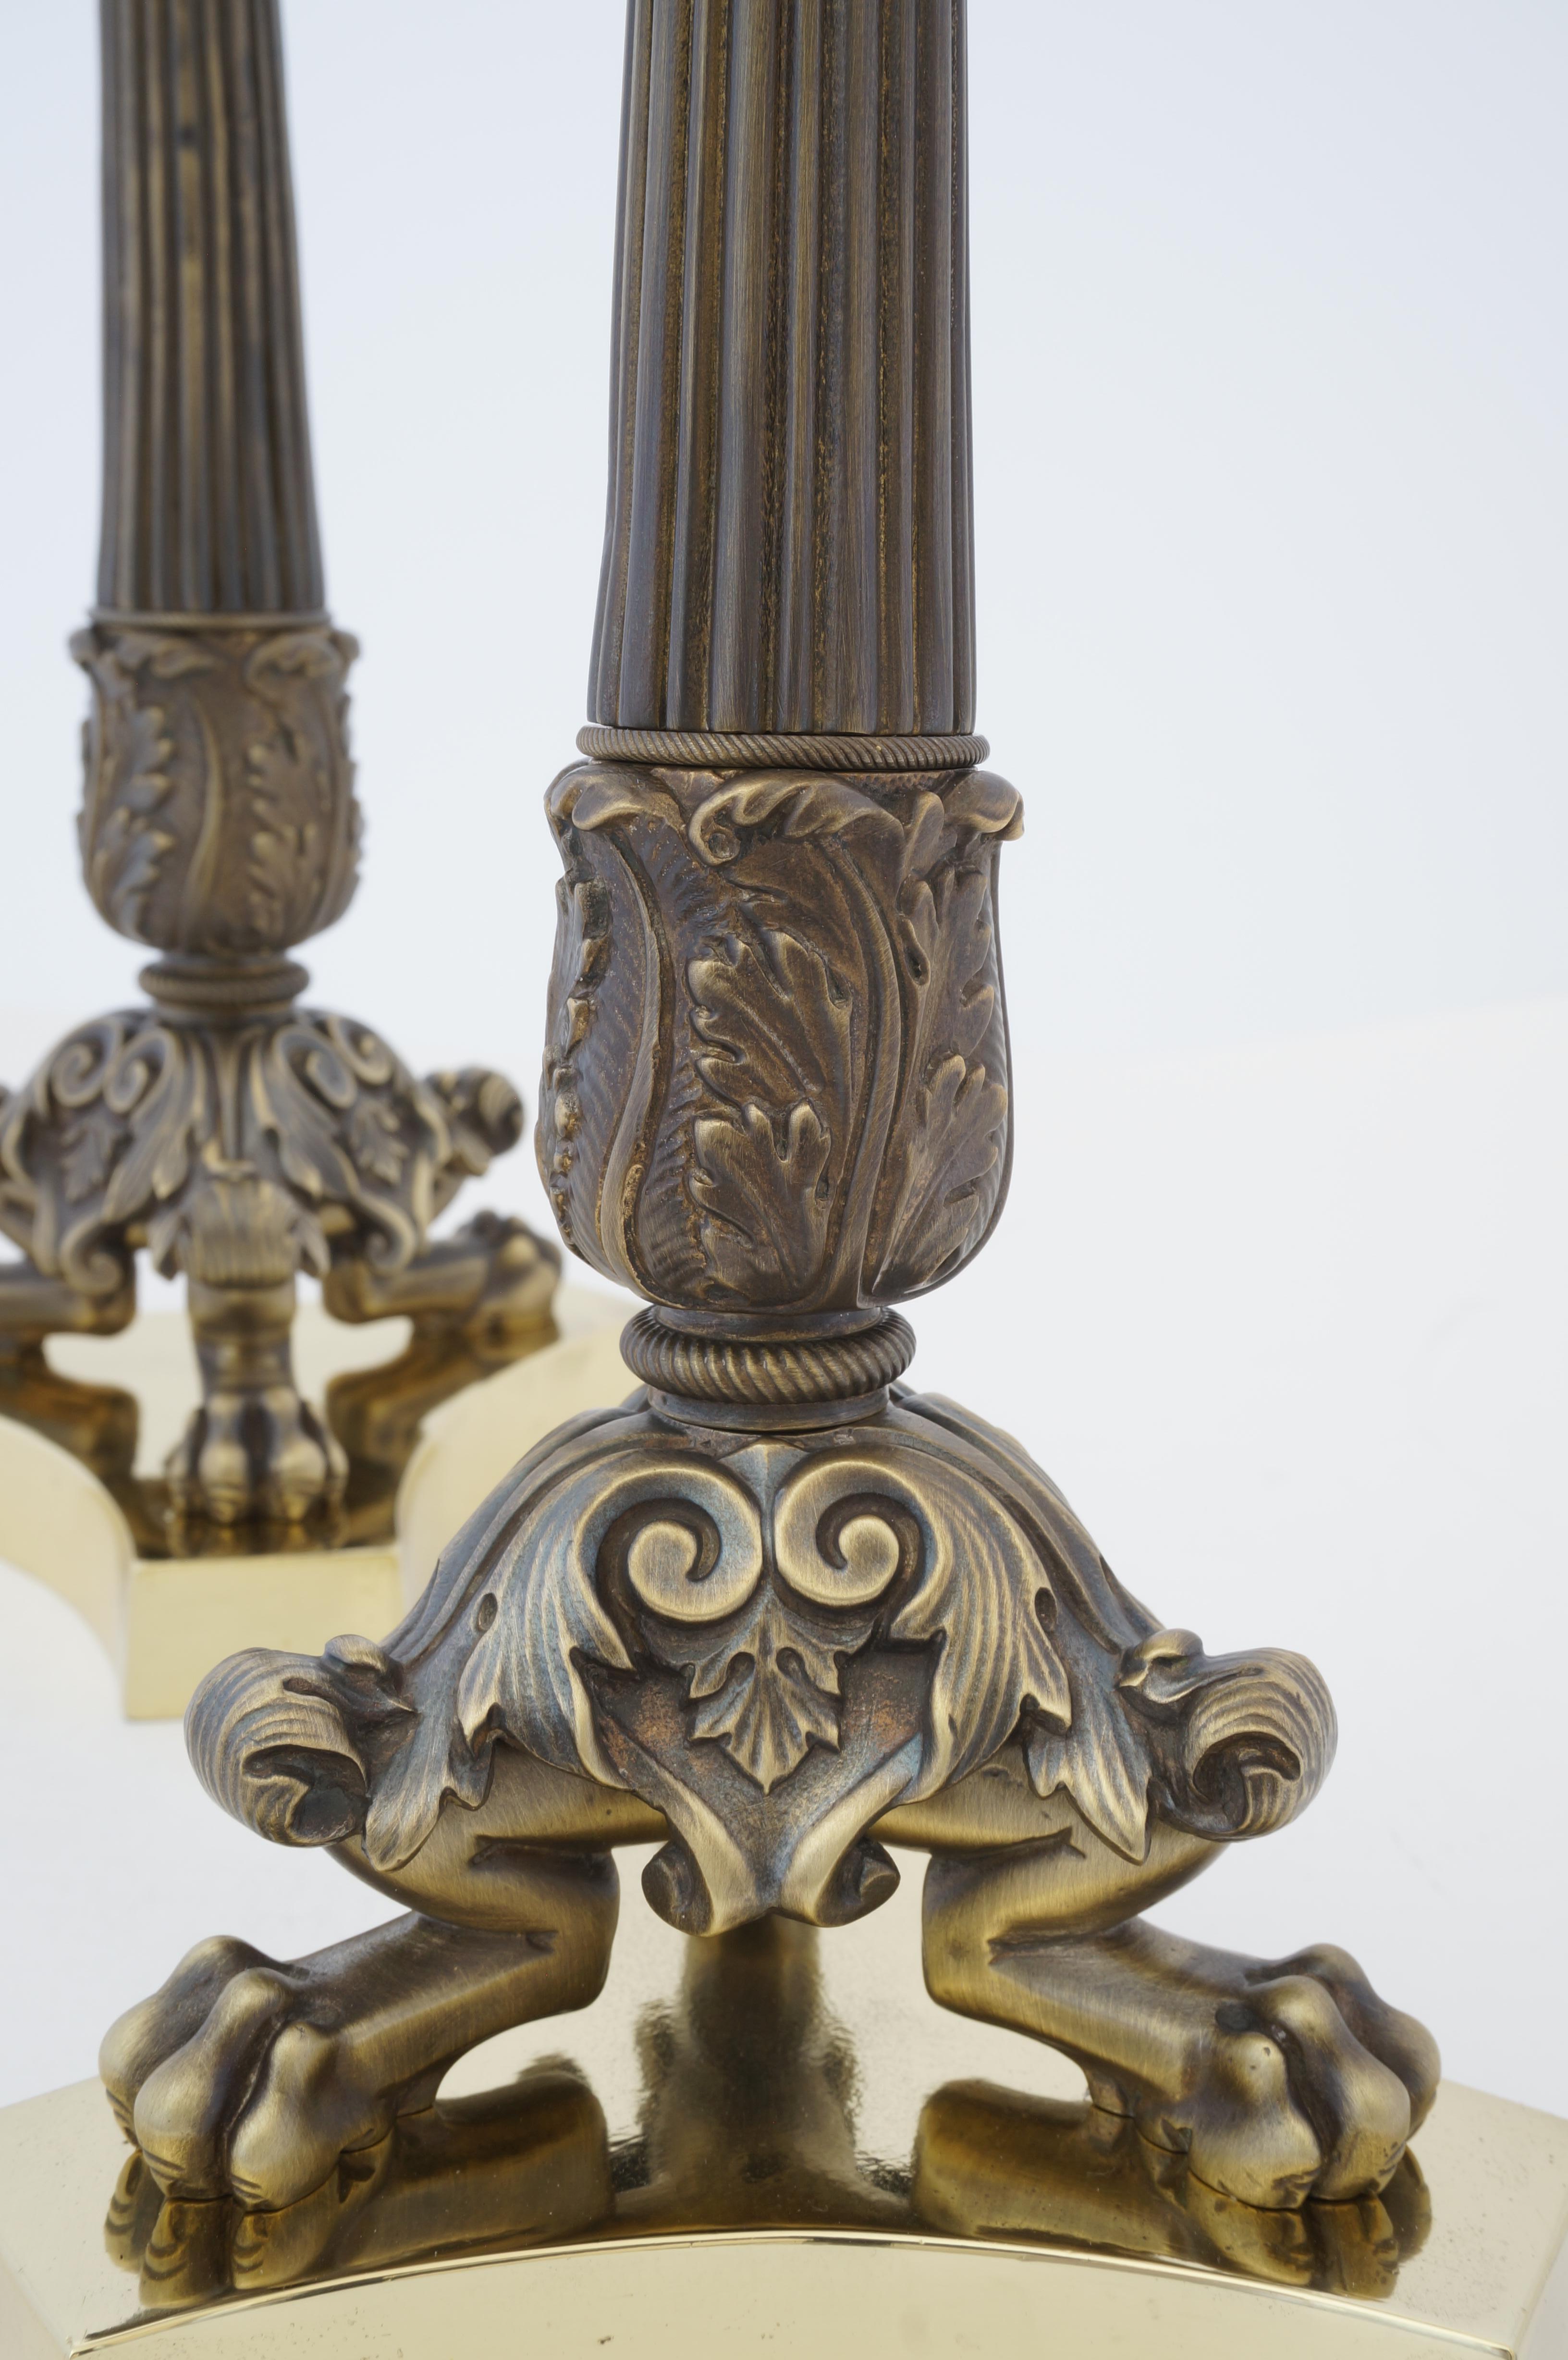 This stylish set of French neo-classical bronze and brass candle sticks have been professional restored.

Note: The pieces have been professionally restored and lacquered to protect the patinated finish.